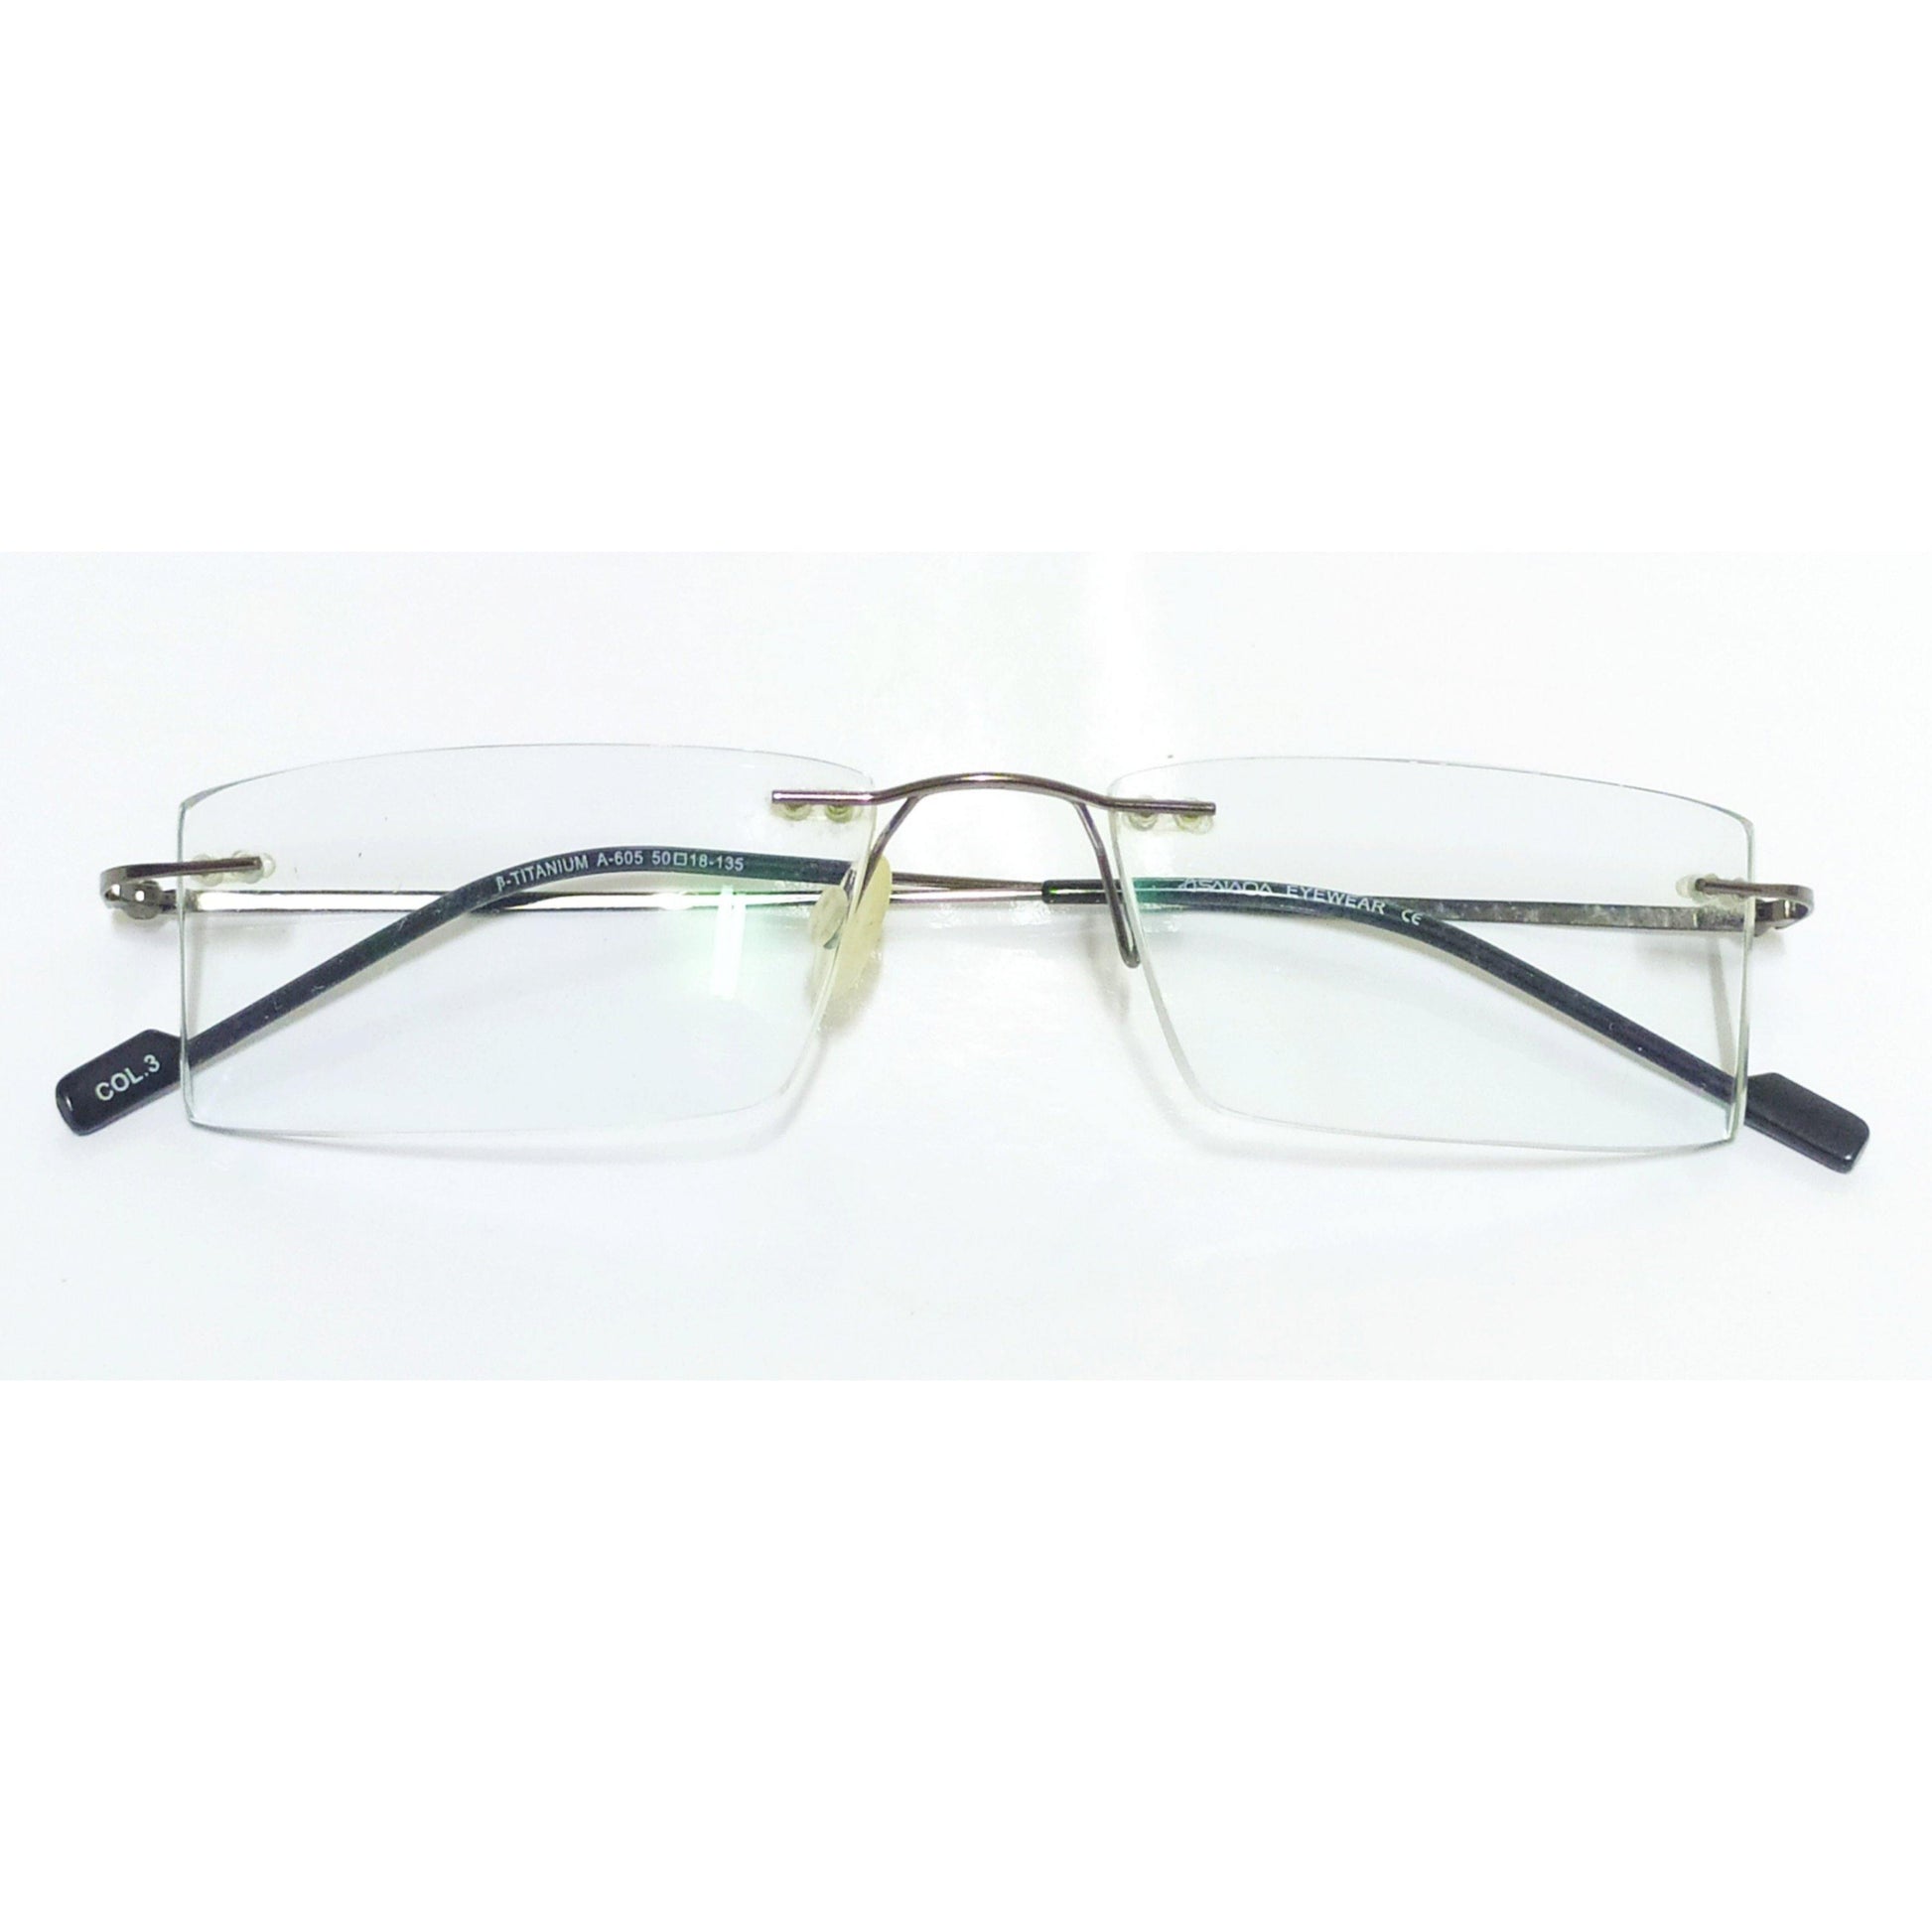 Buy Grey Rimless Computer Glasses with Blue Tint Anti Glare Coating Lens - Glasses India Online in India